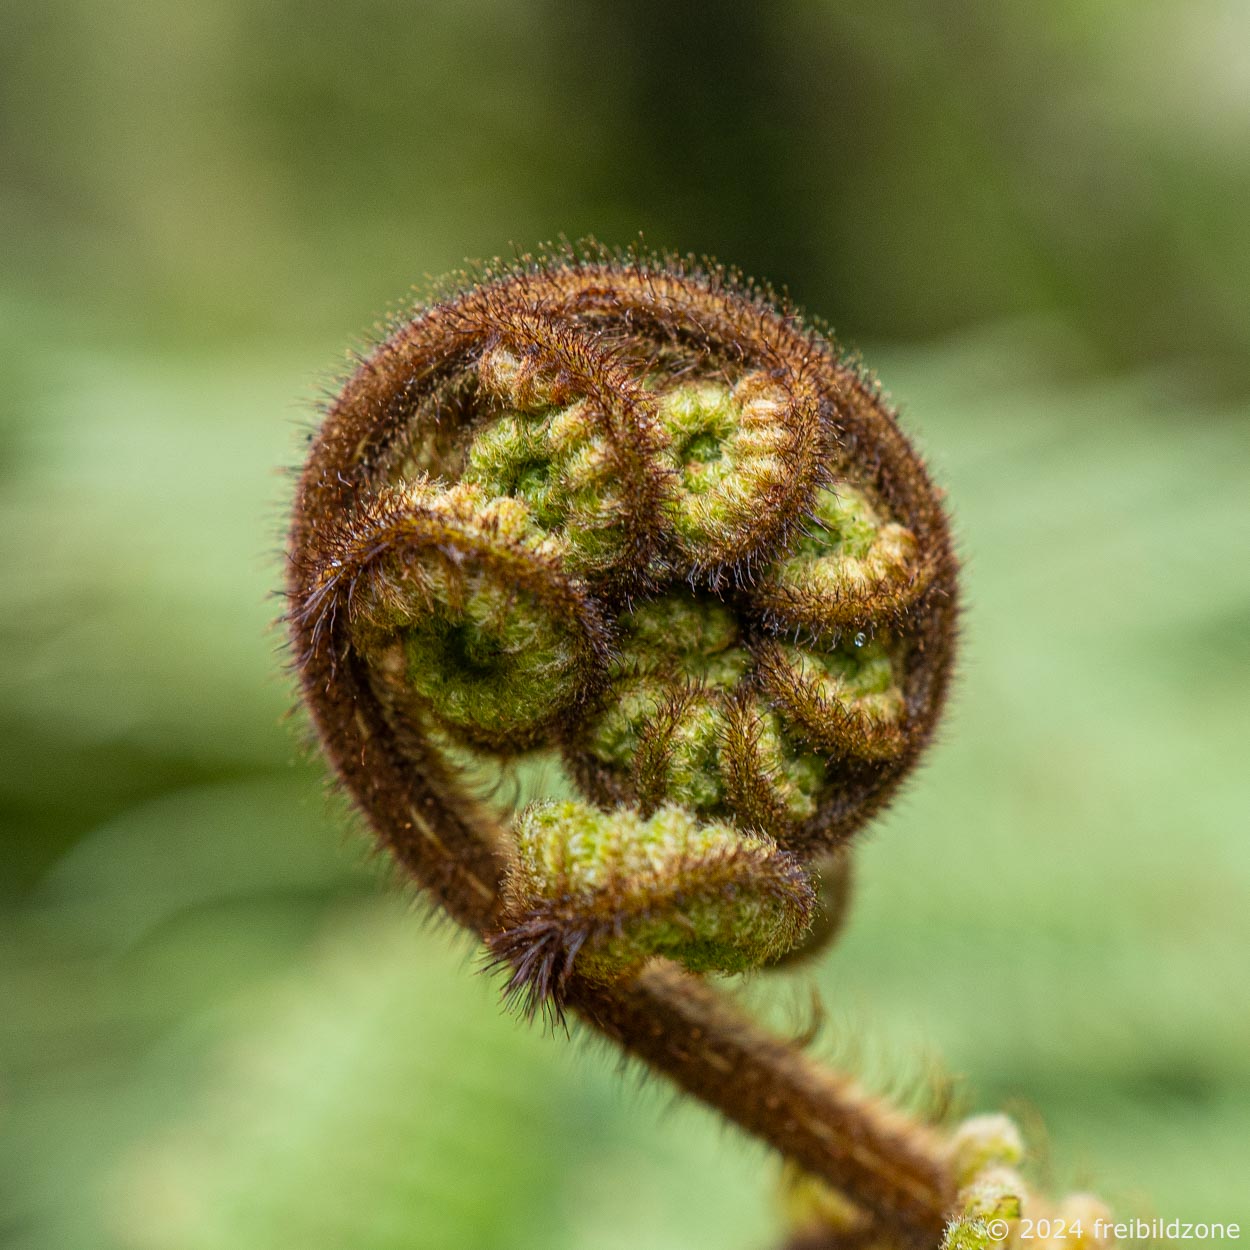 Another unfolding fern